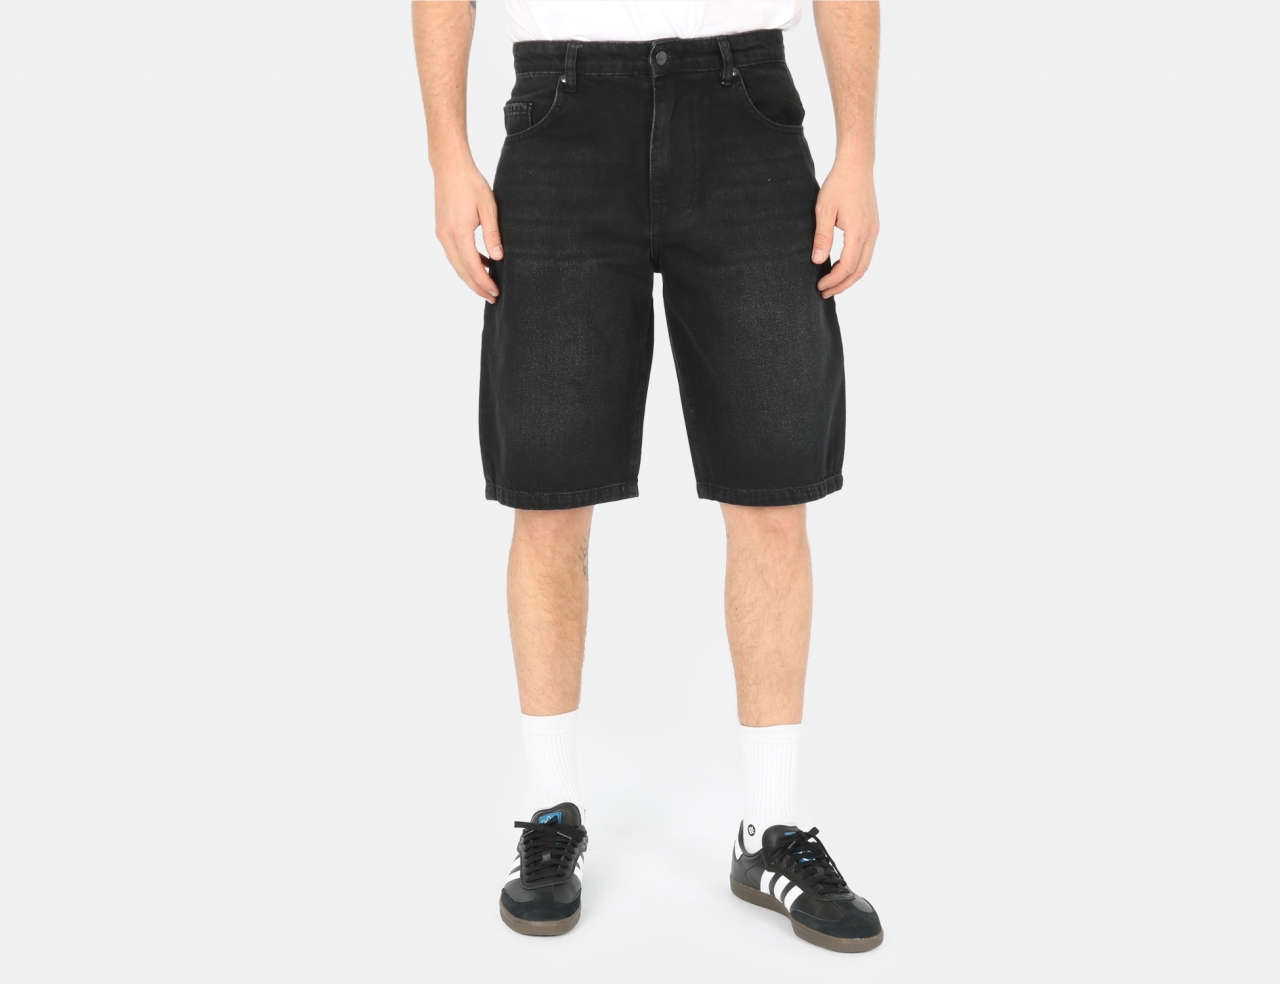 Reell Jeans Solid Short - Black Wash